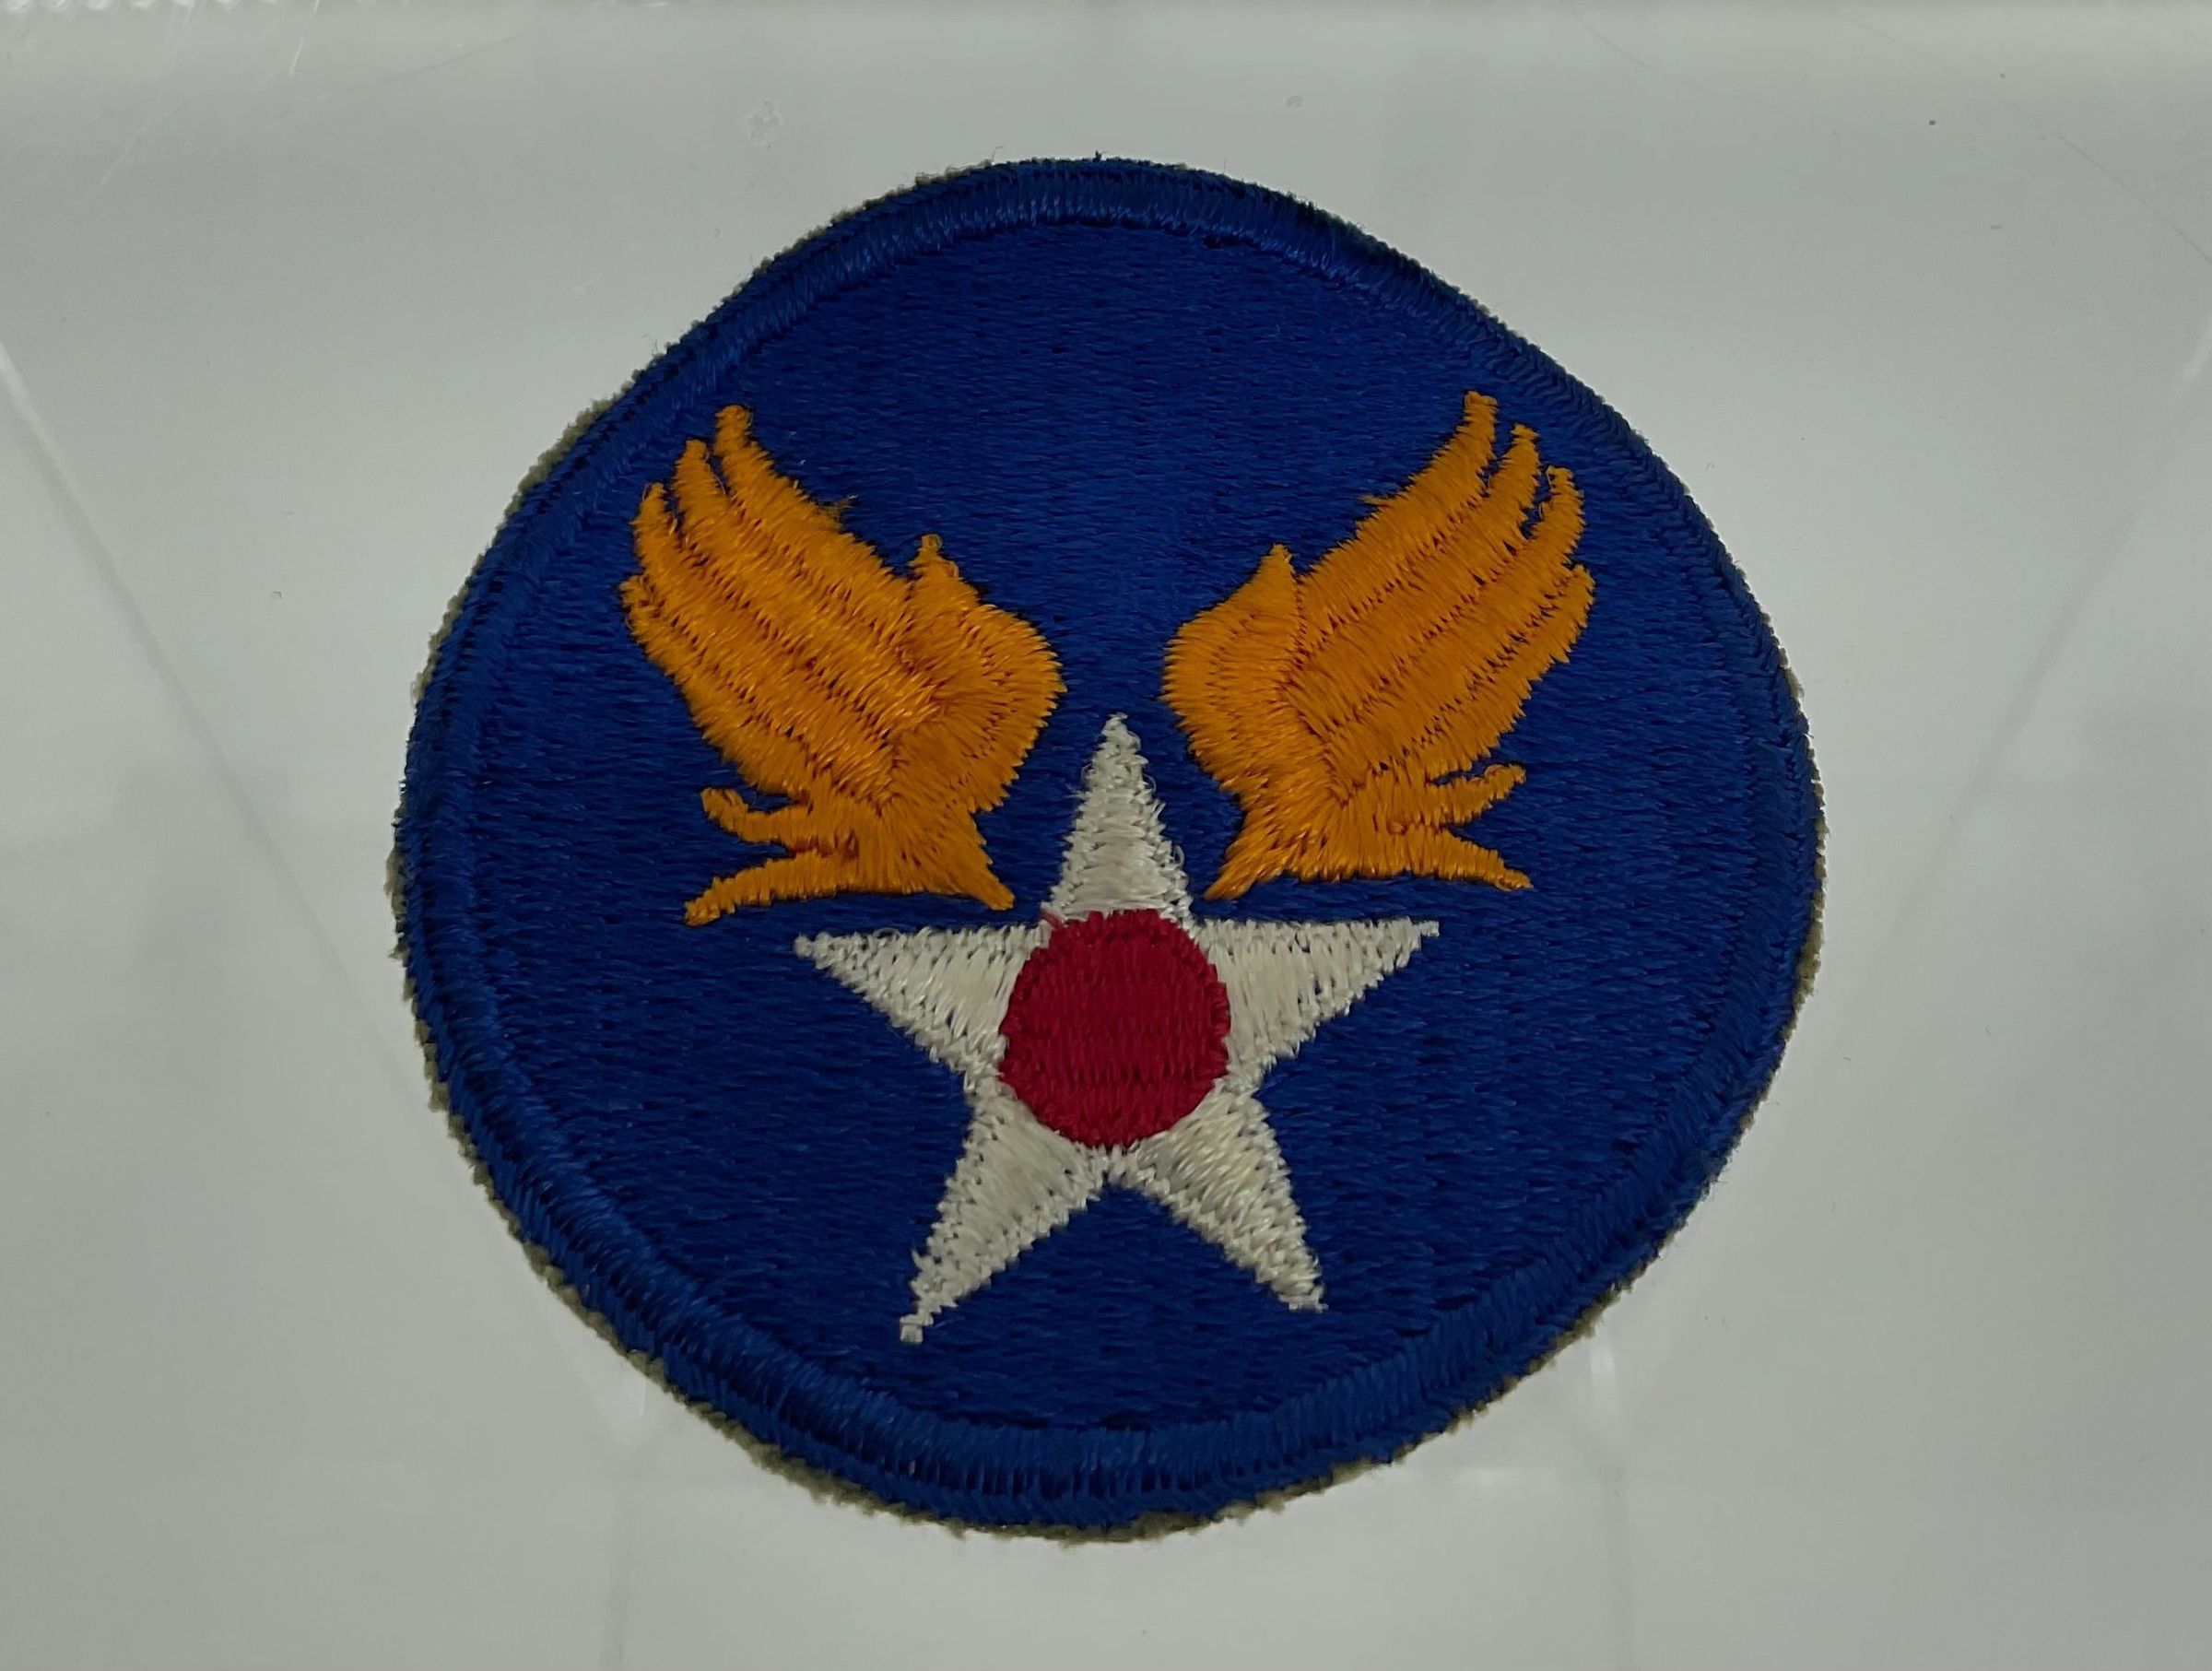 Primary Image of Army Air Force WASP Patch